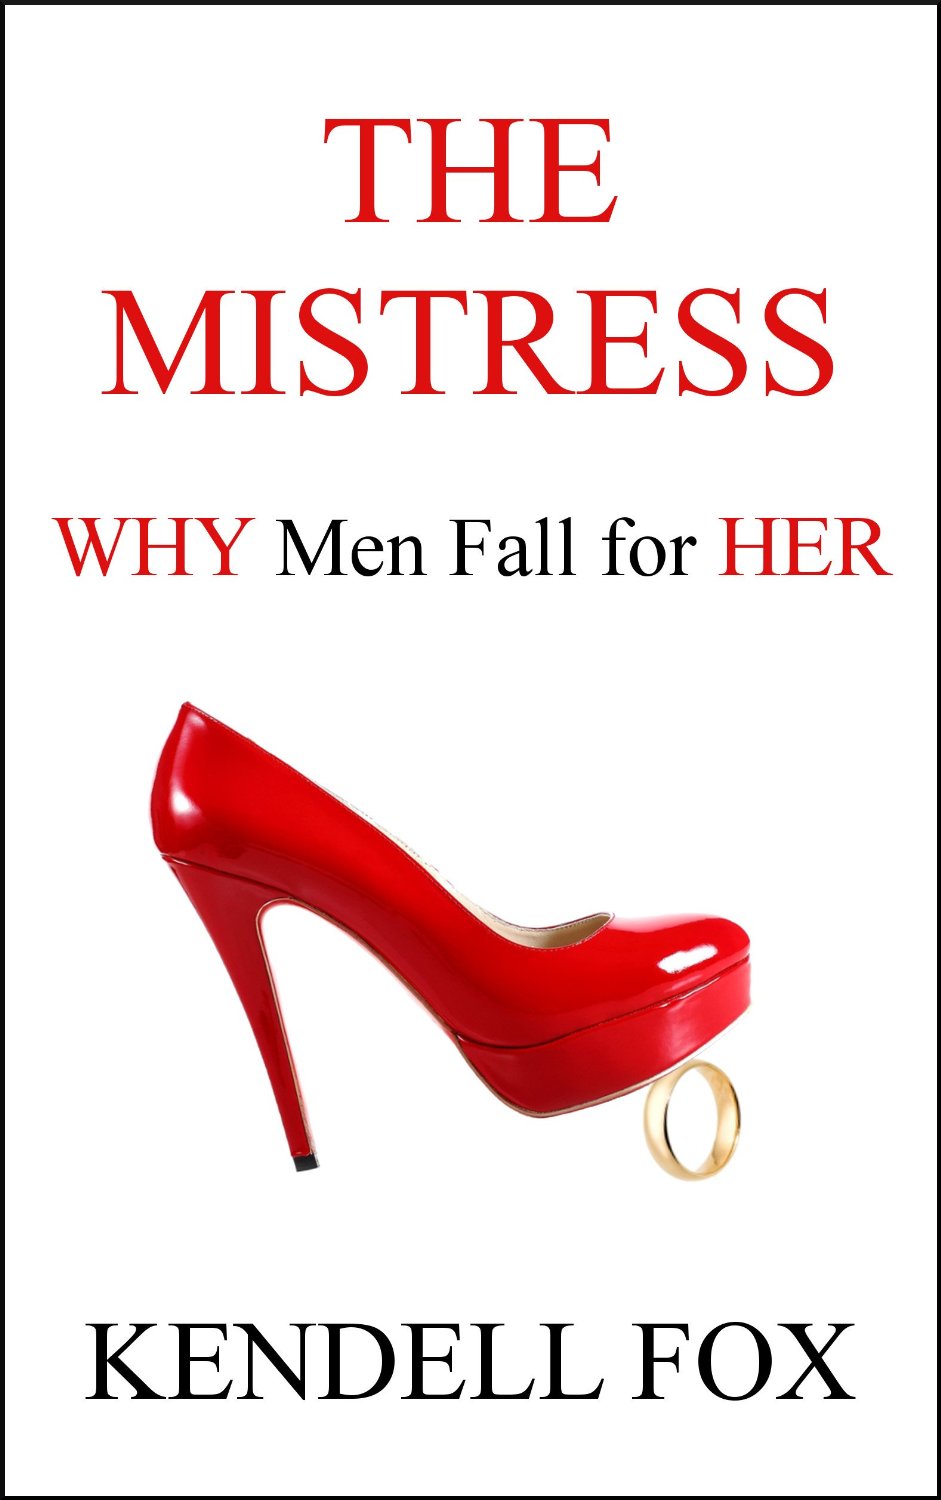 The Mistress: Why Men Fall for Her by Kendell Fox